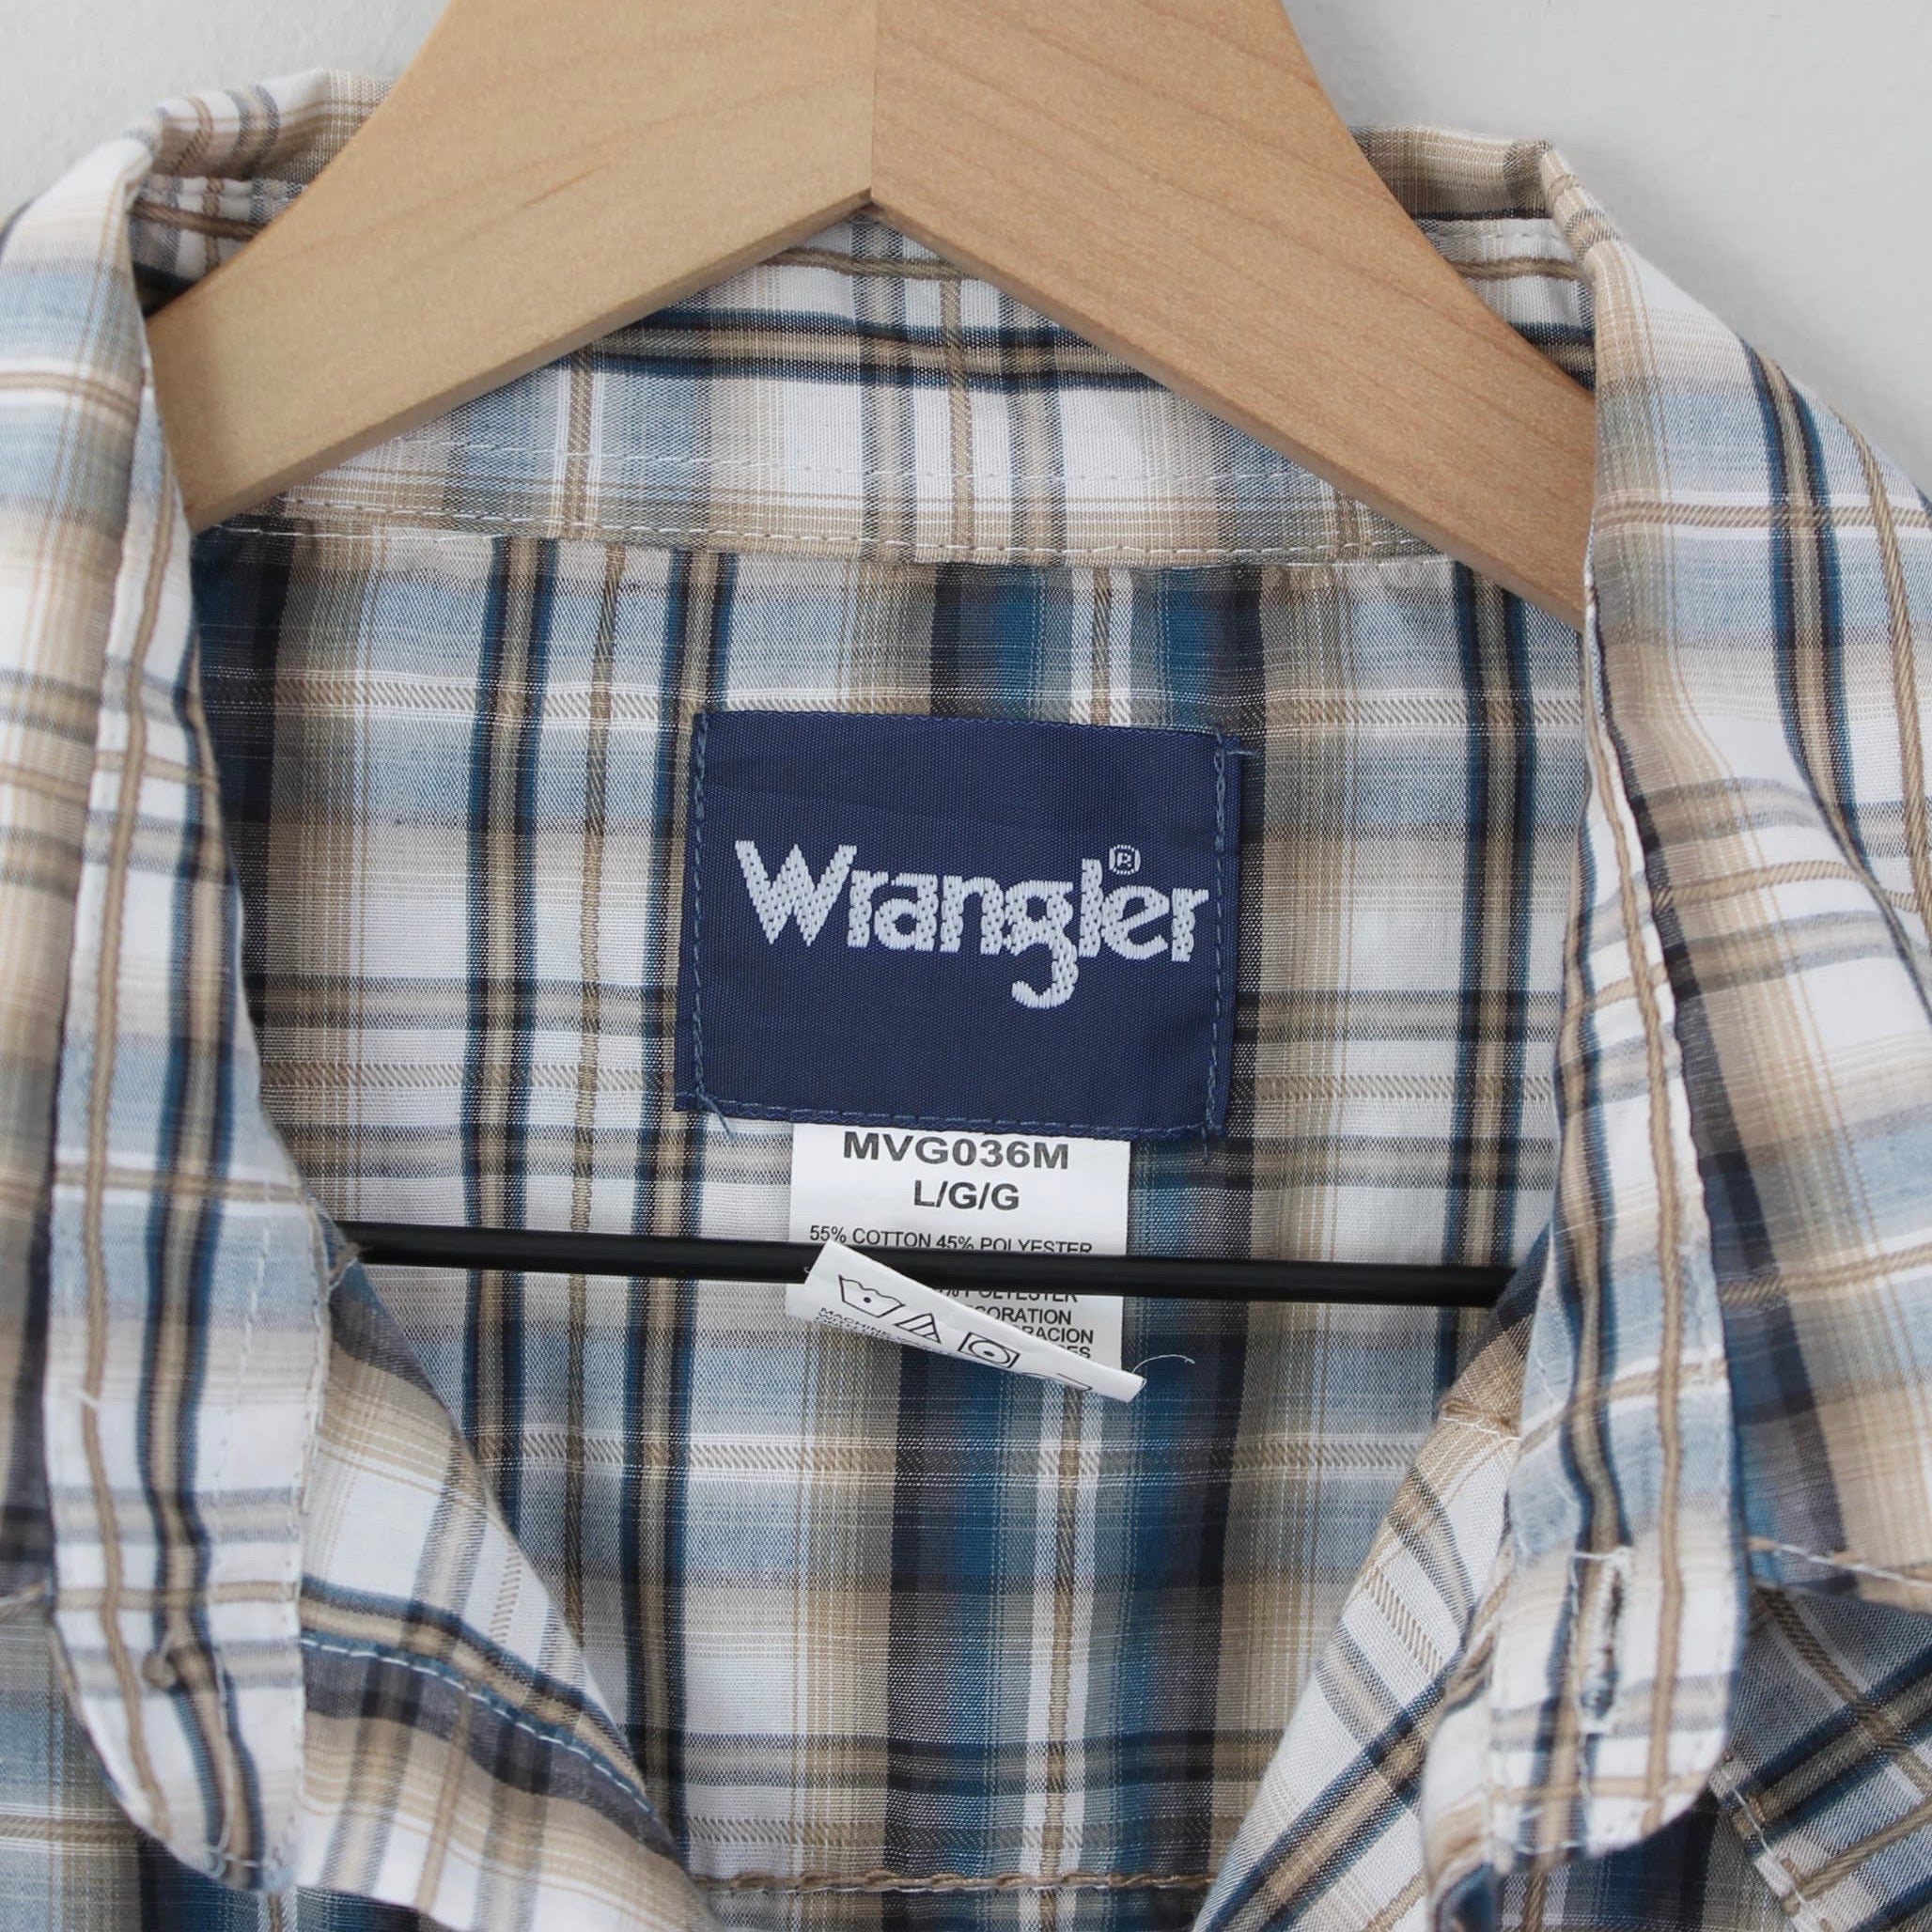 Vintage 80s Blue and Beige Wrangler, Plaid Snap Button Western